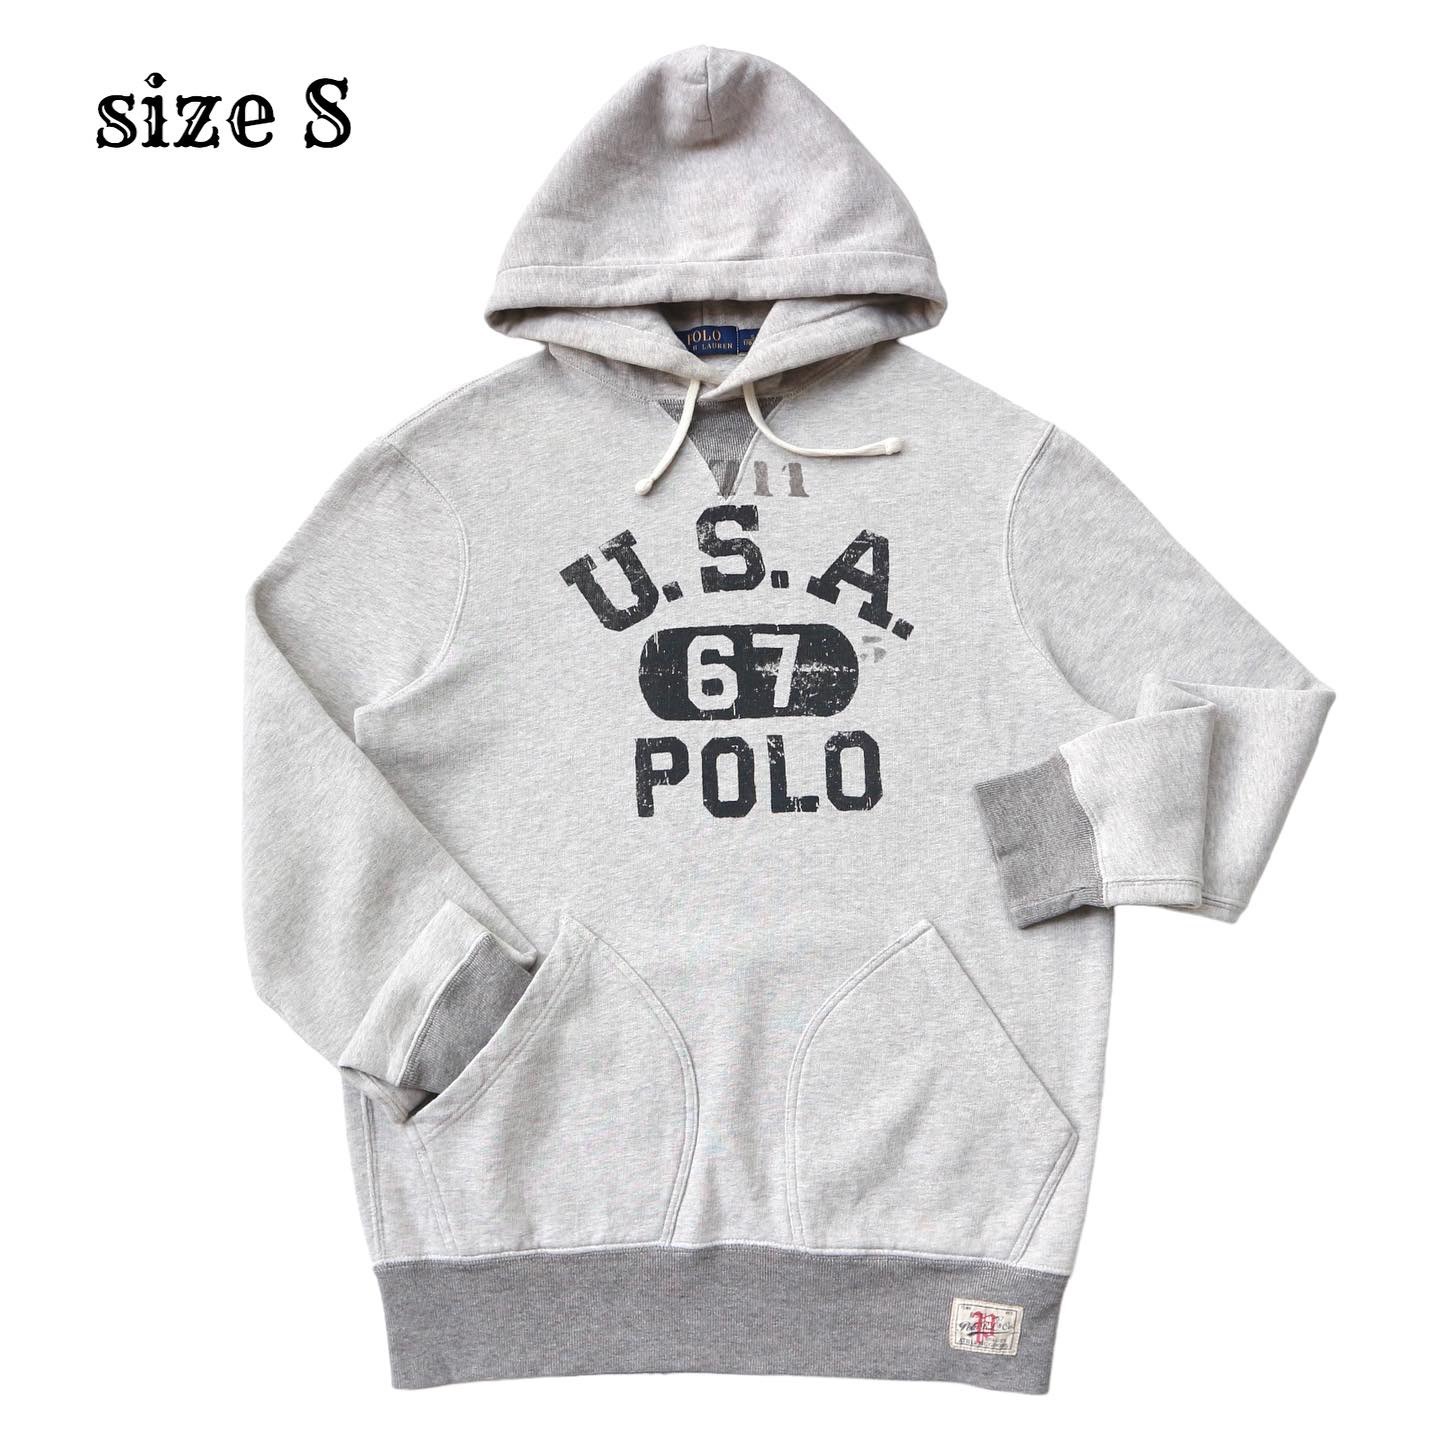 Polo by Ralph Lauren Hoodie Size S denimister